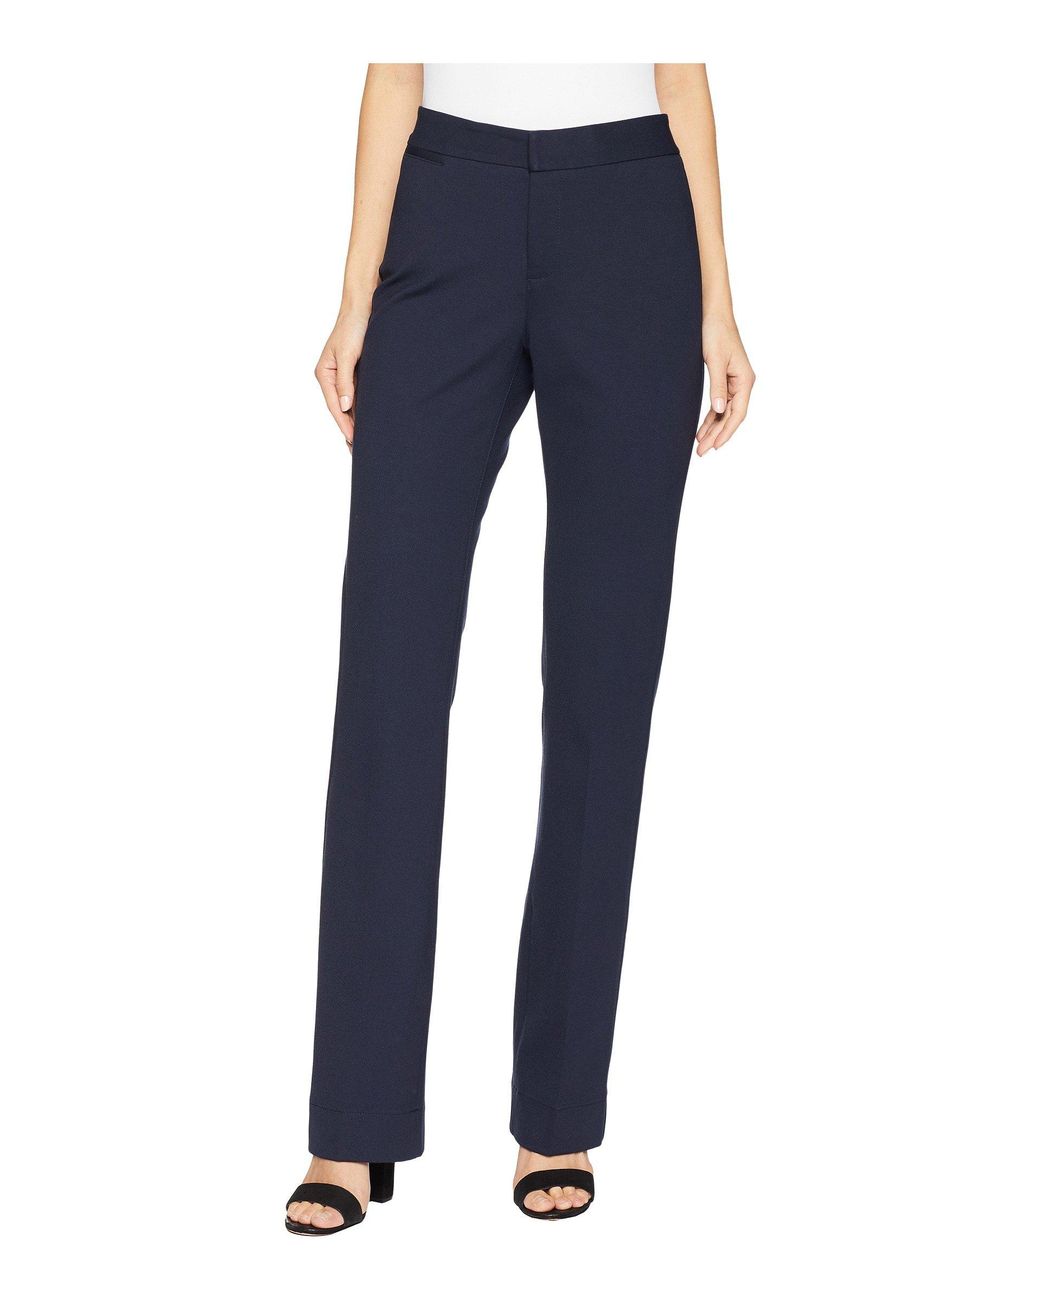 NYDJ Synthetic Ponte Trouser Pants in Navy (Blue) - Lyst